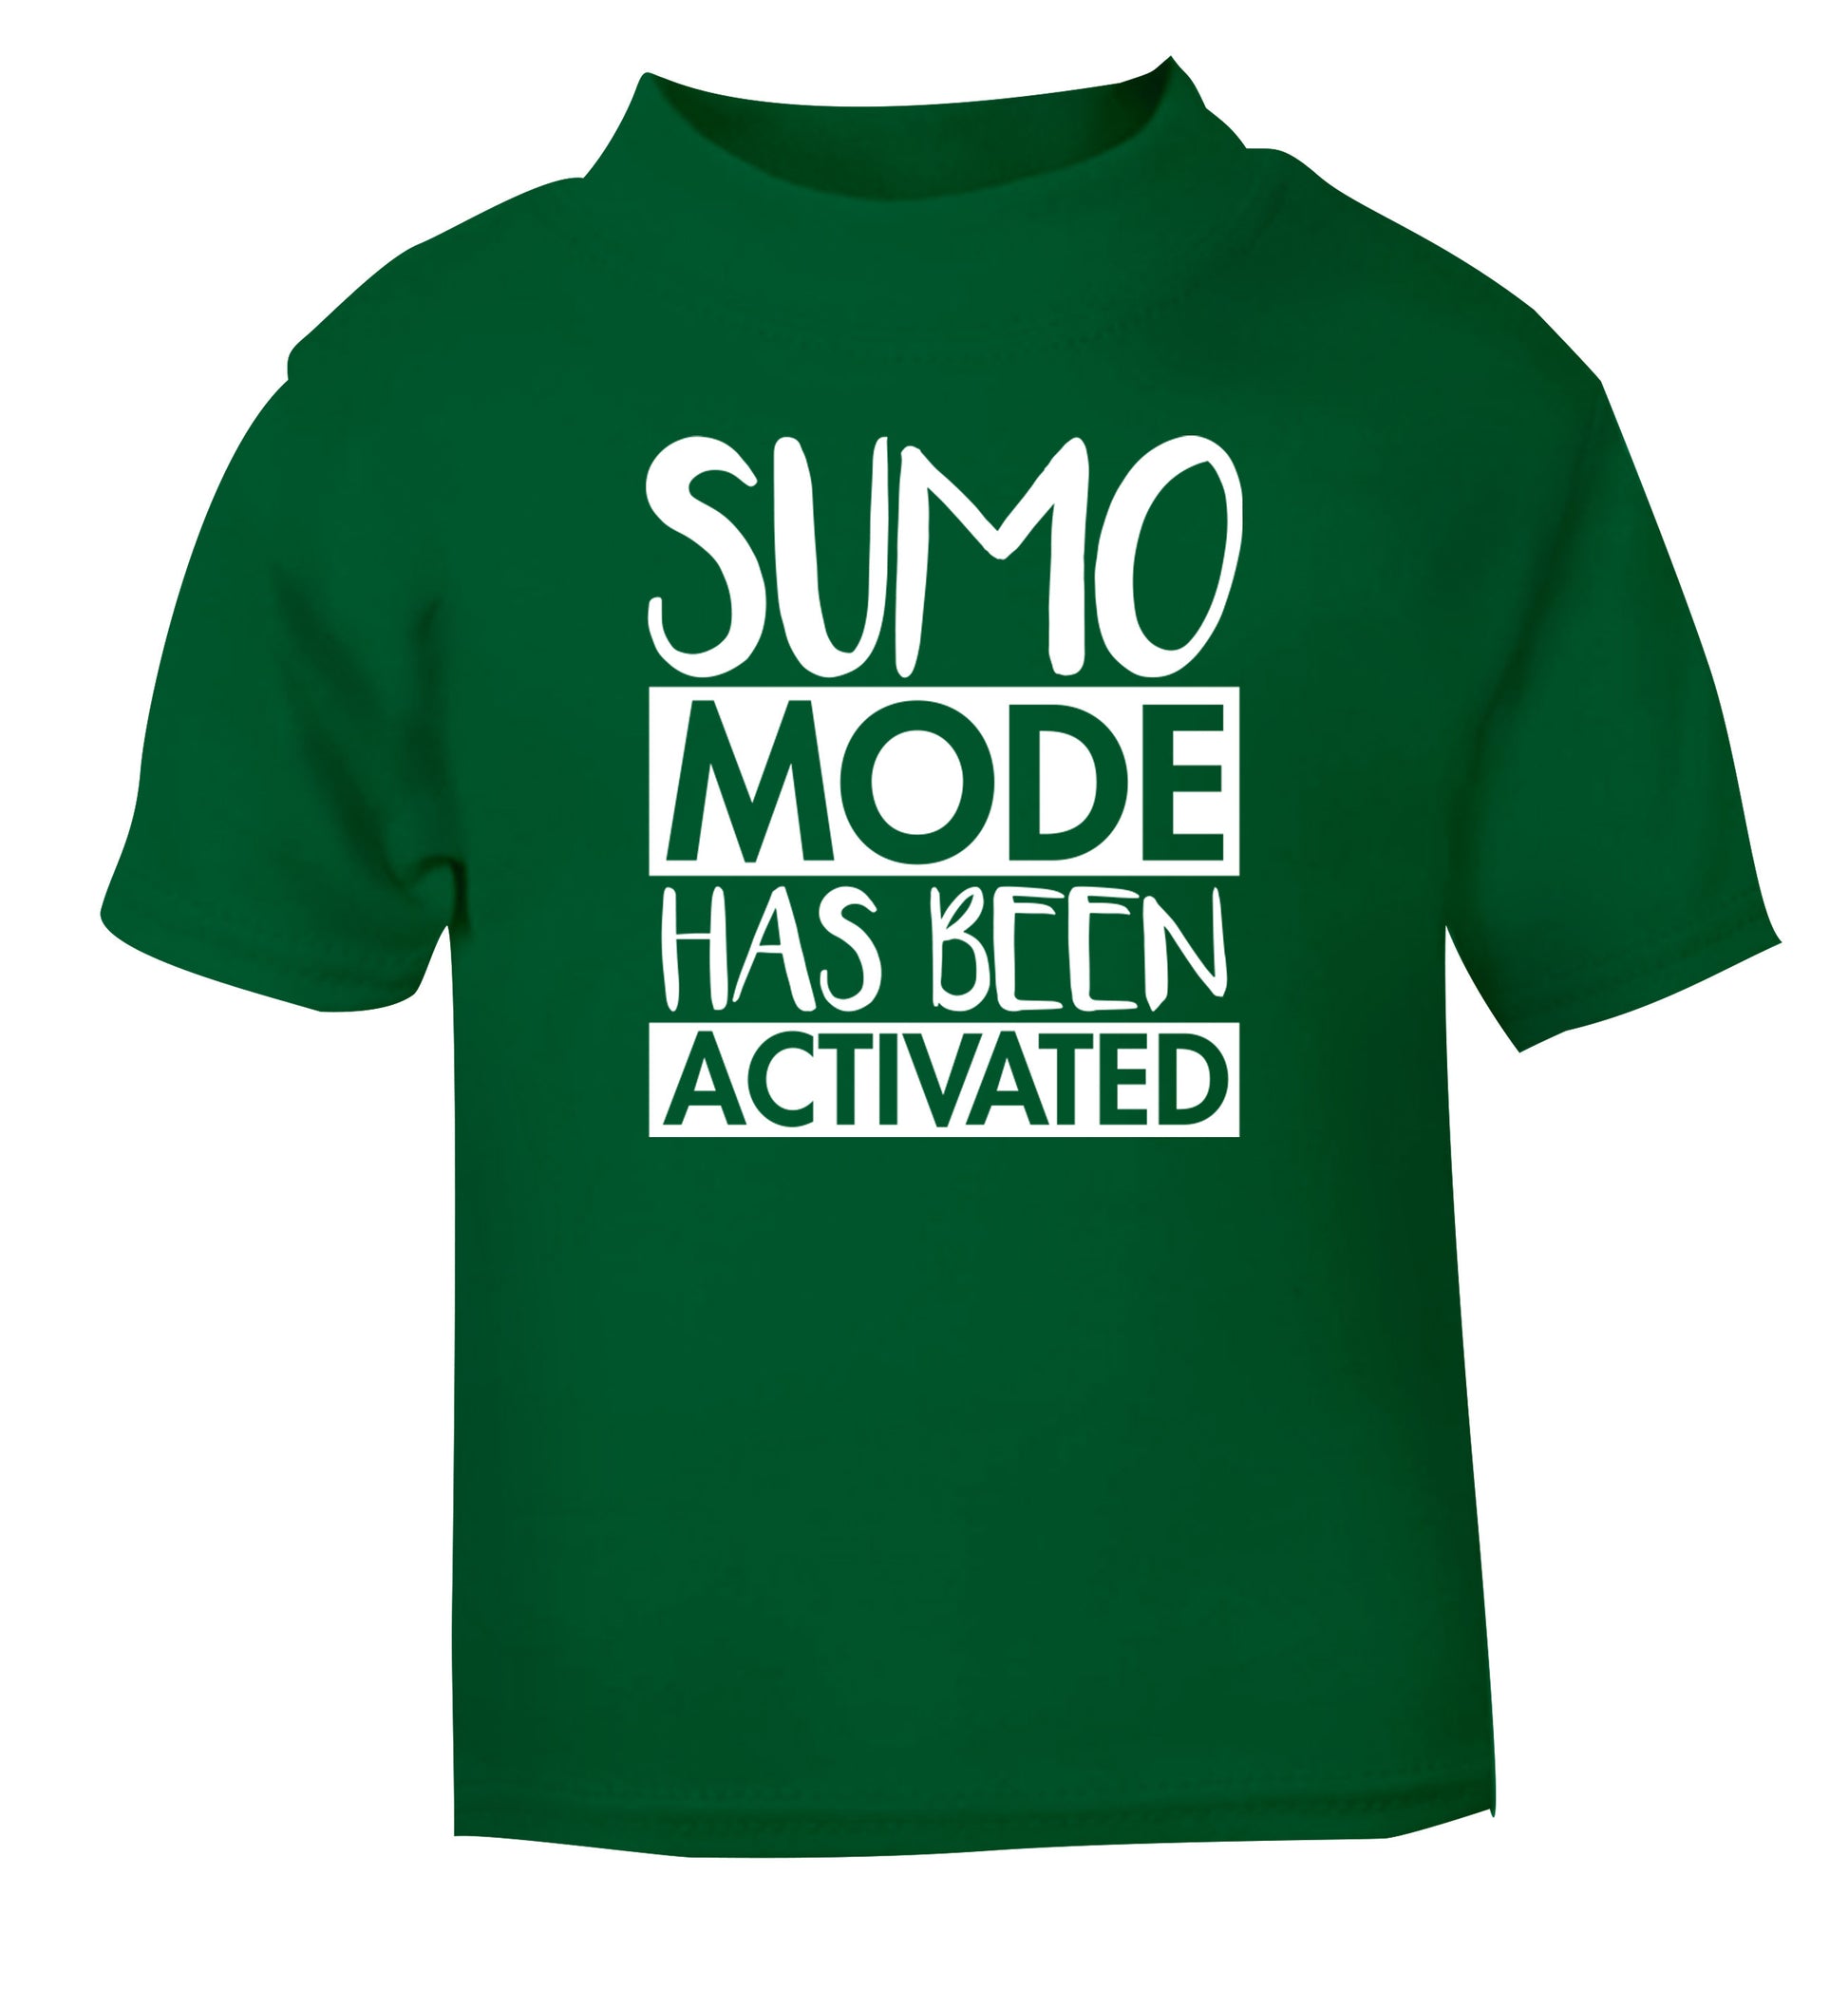 Sumo mode activated green Baby Toddler Tshirt 2 Years